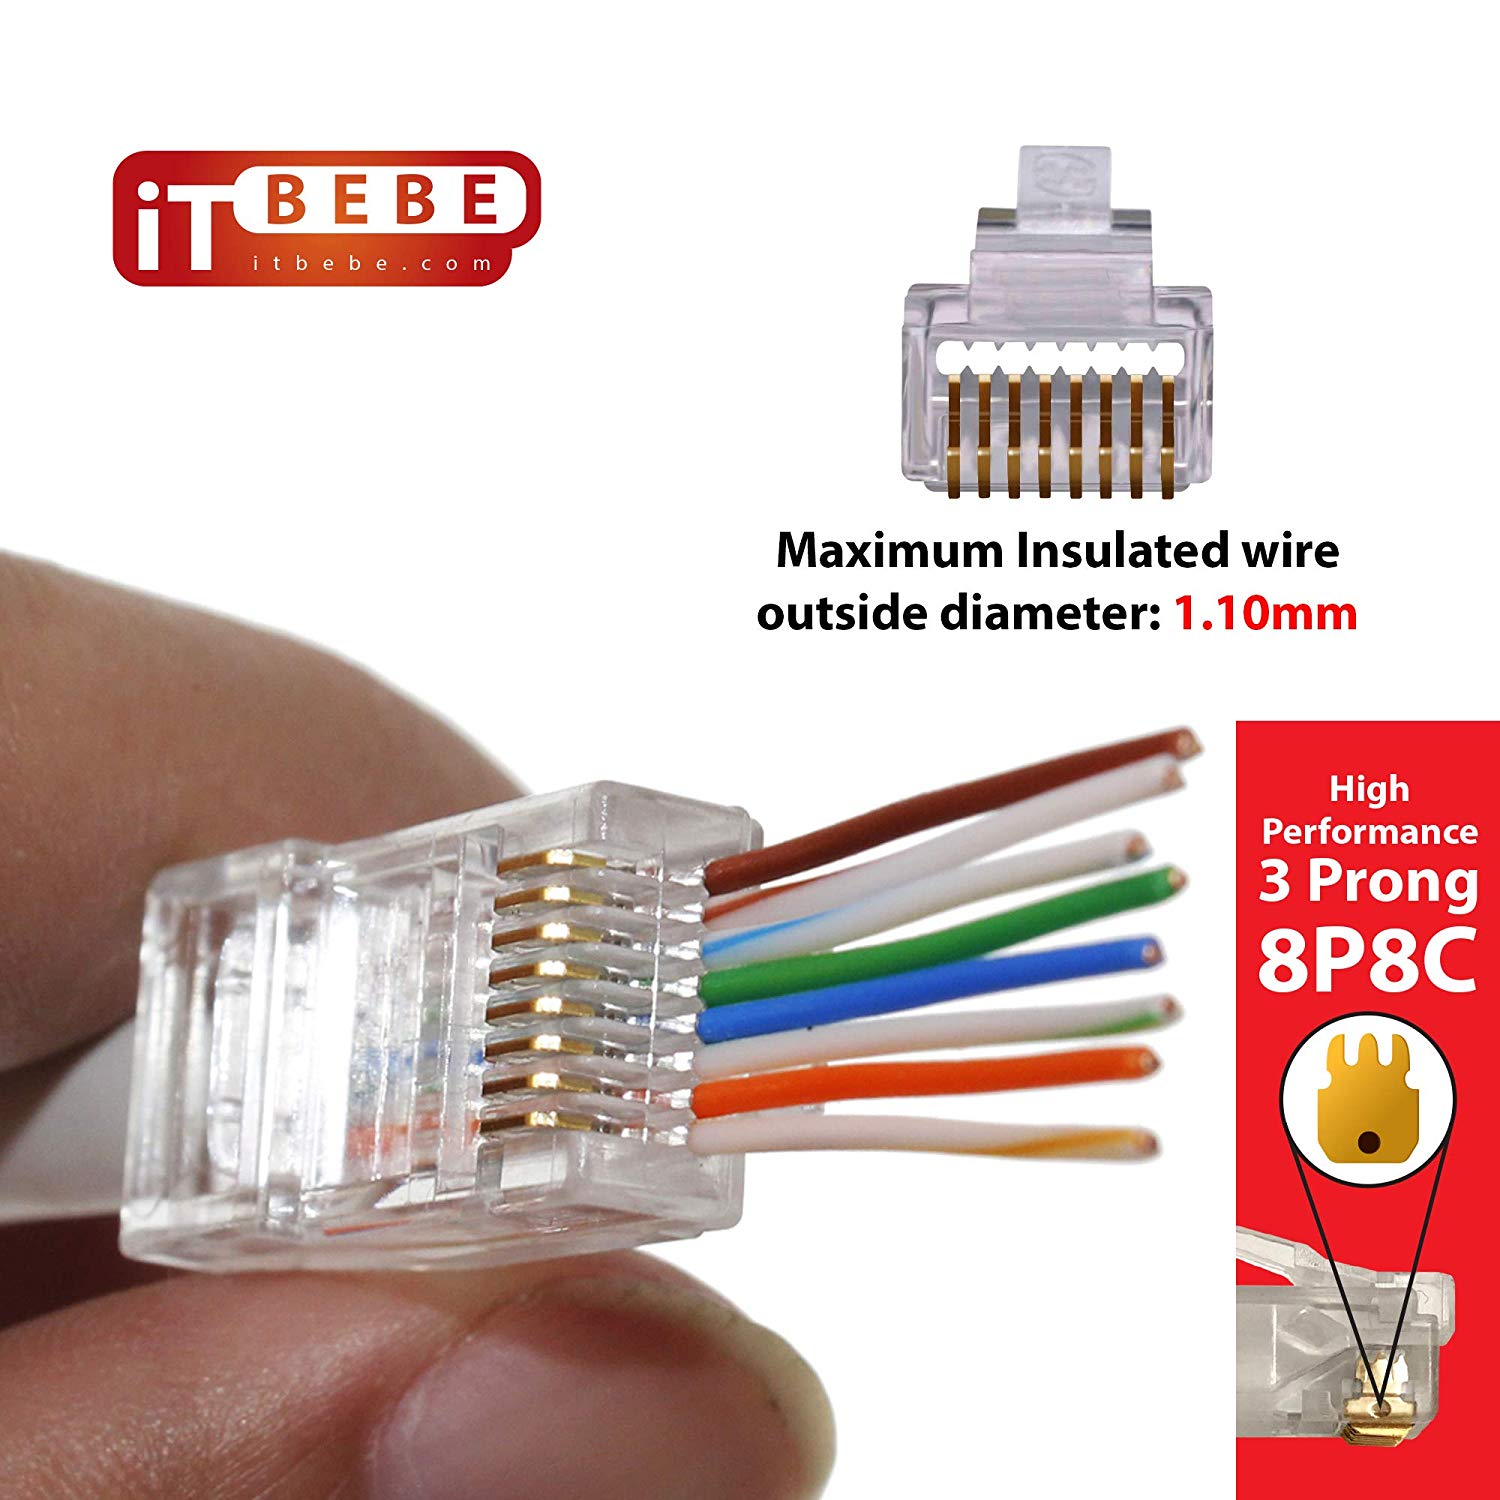 Conector RJ45 8 Hilos CAT.6 AWG24 (100 UDS